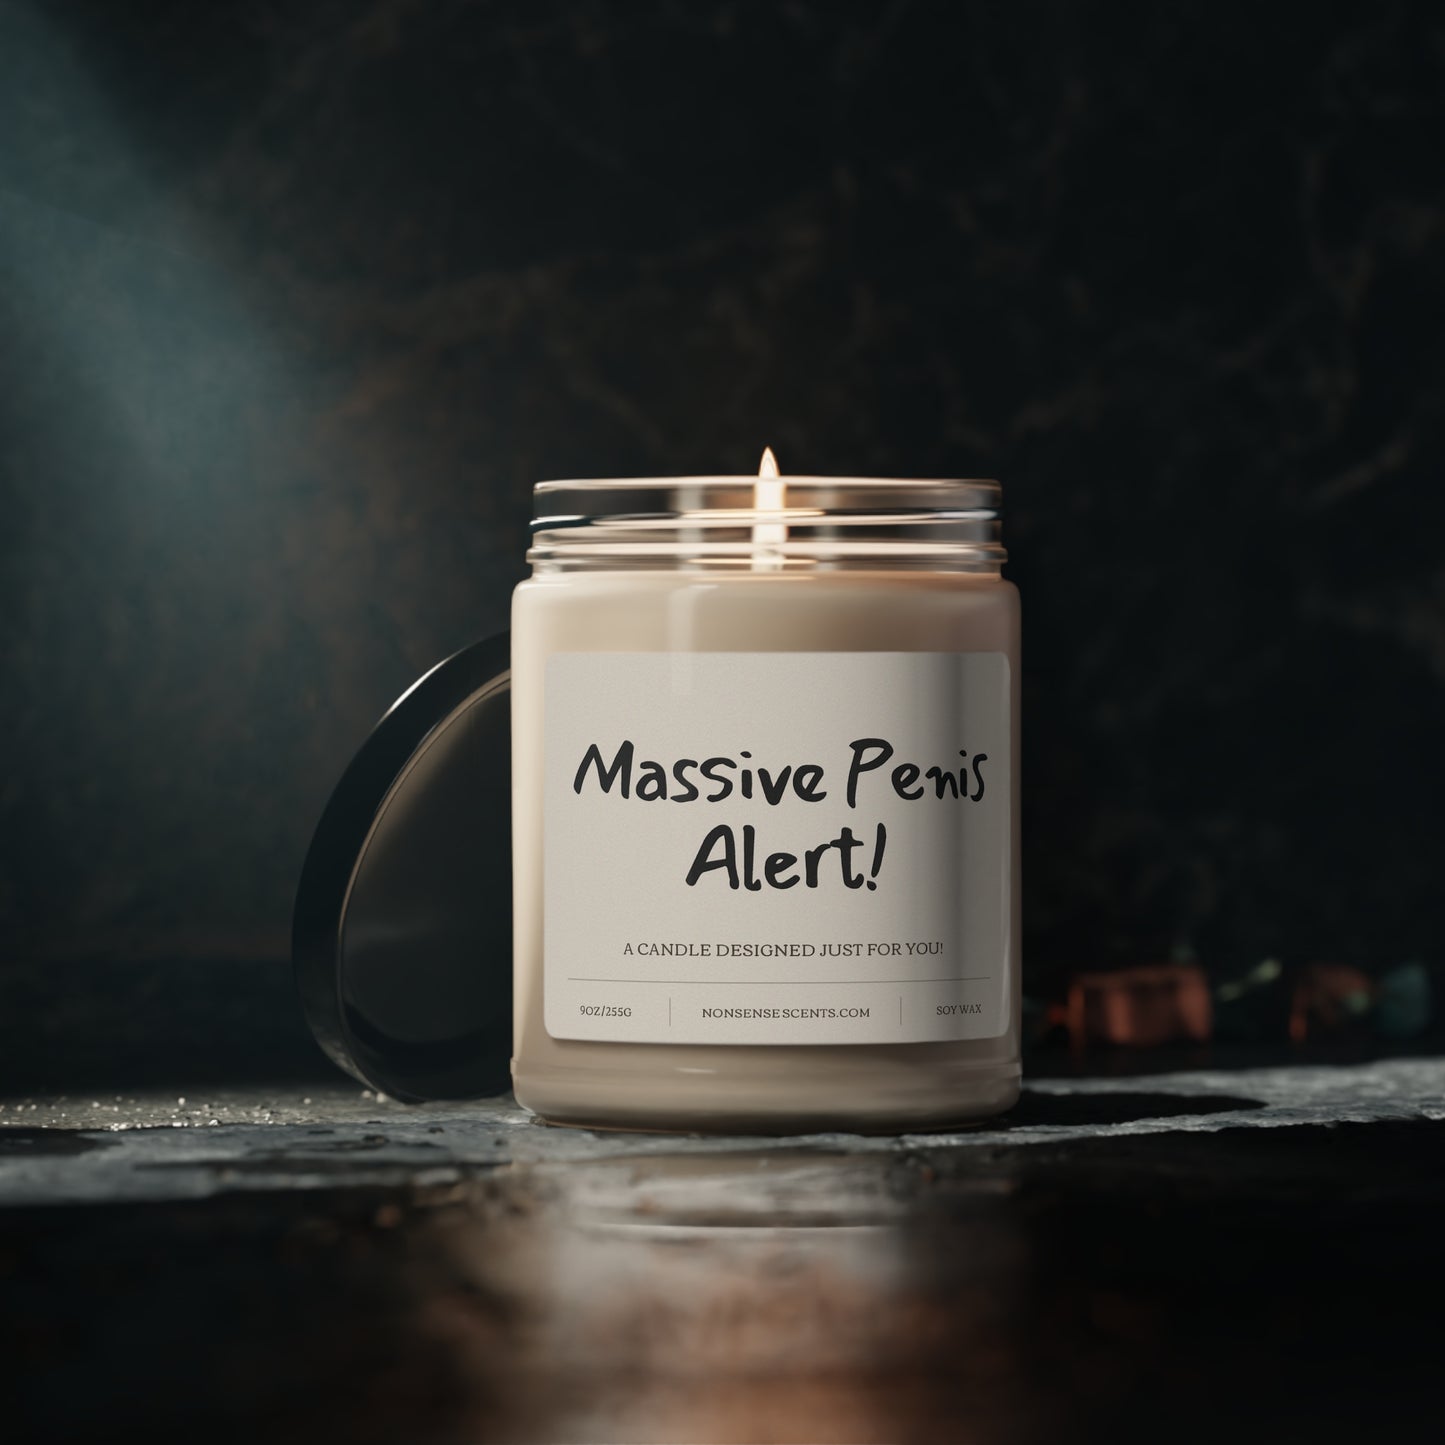 "Massive Penis Alert!" Scented Candle